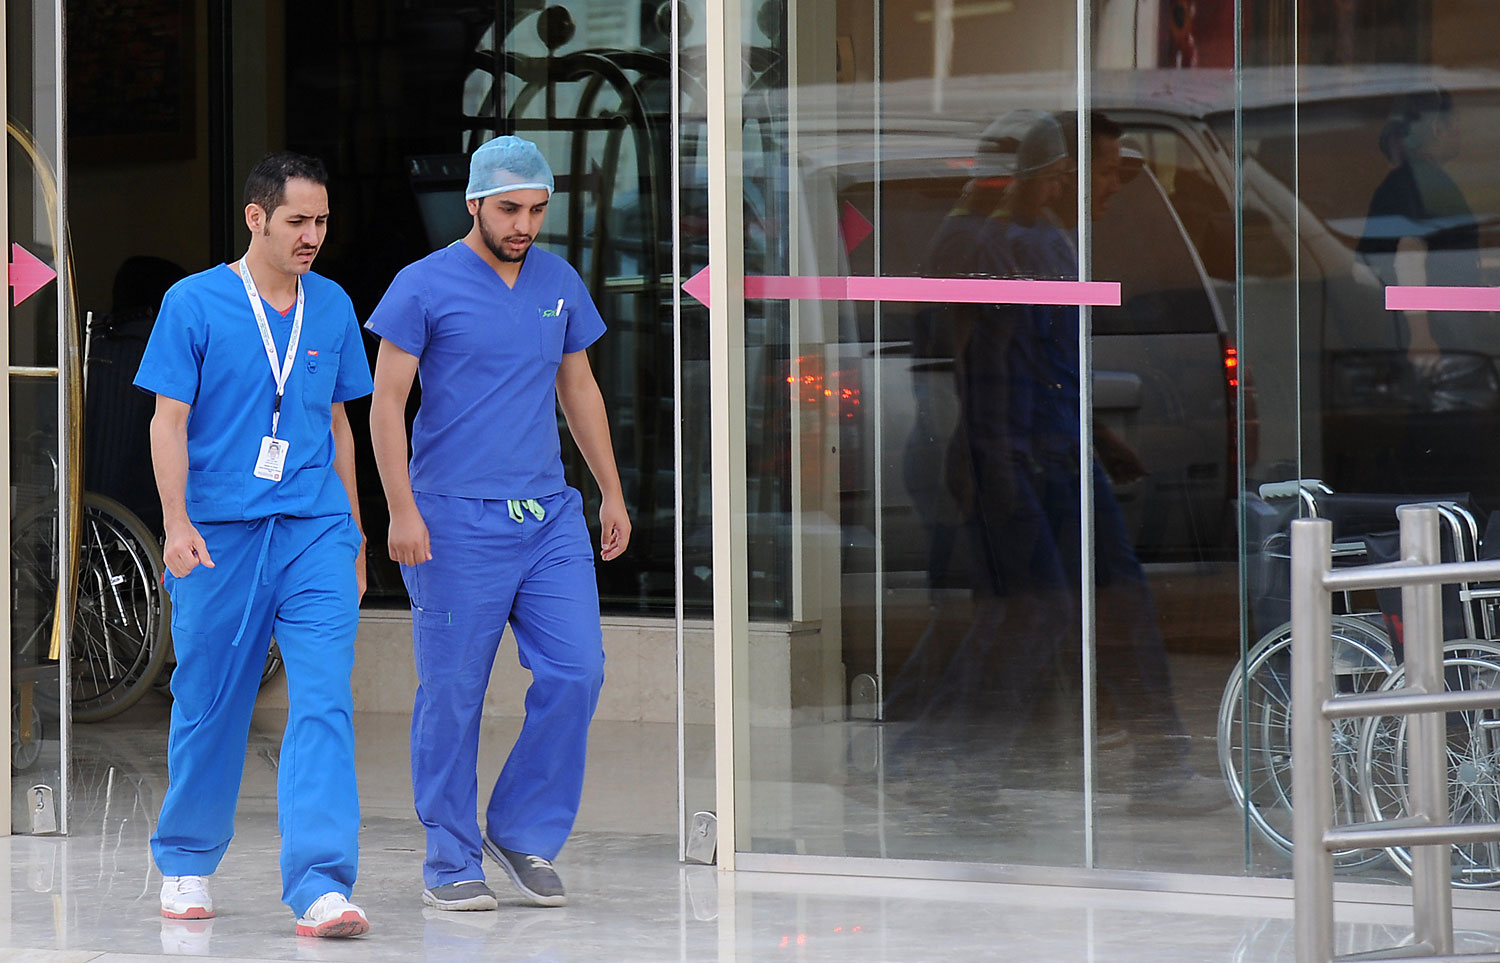 Saudi medical staff leave the emergency department at a hospital in the center of Riyadh on April 8, 2014 (Fayez Nureldine—AFP/Getty Images)